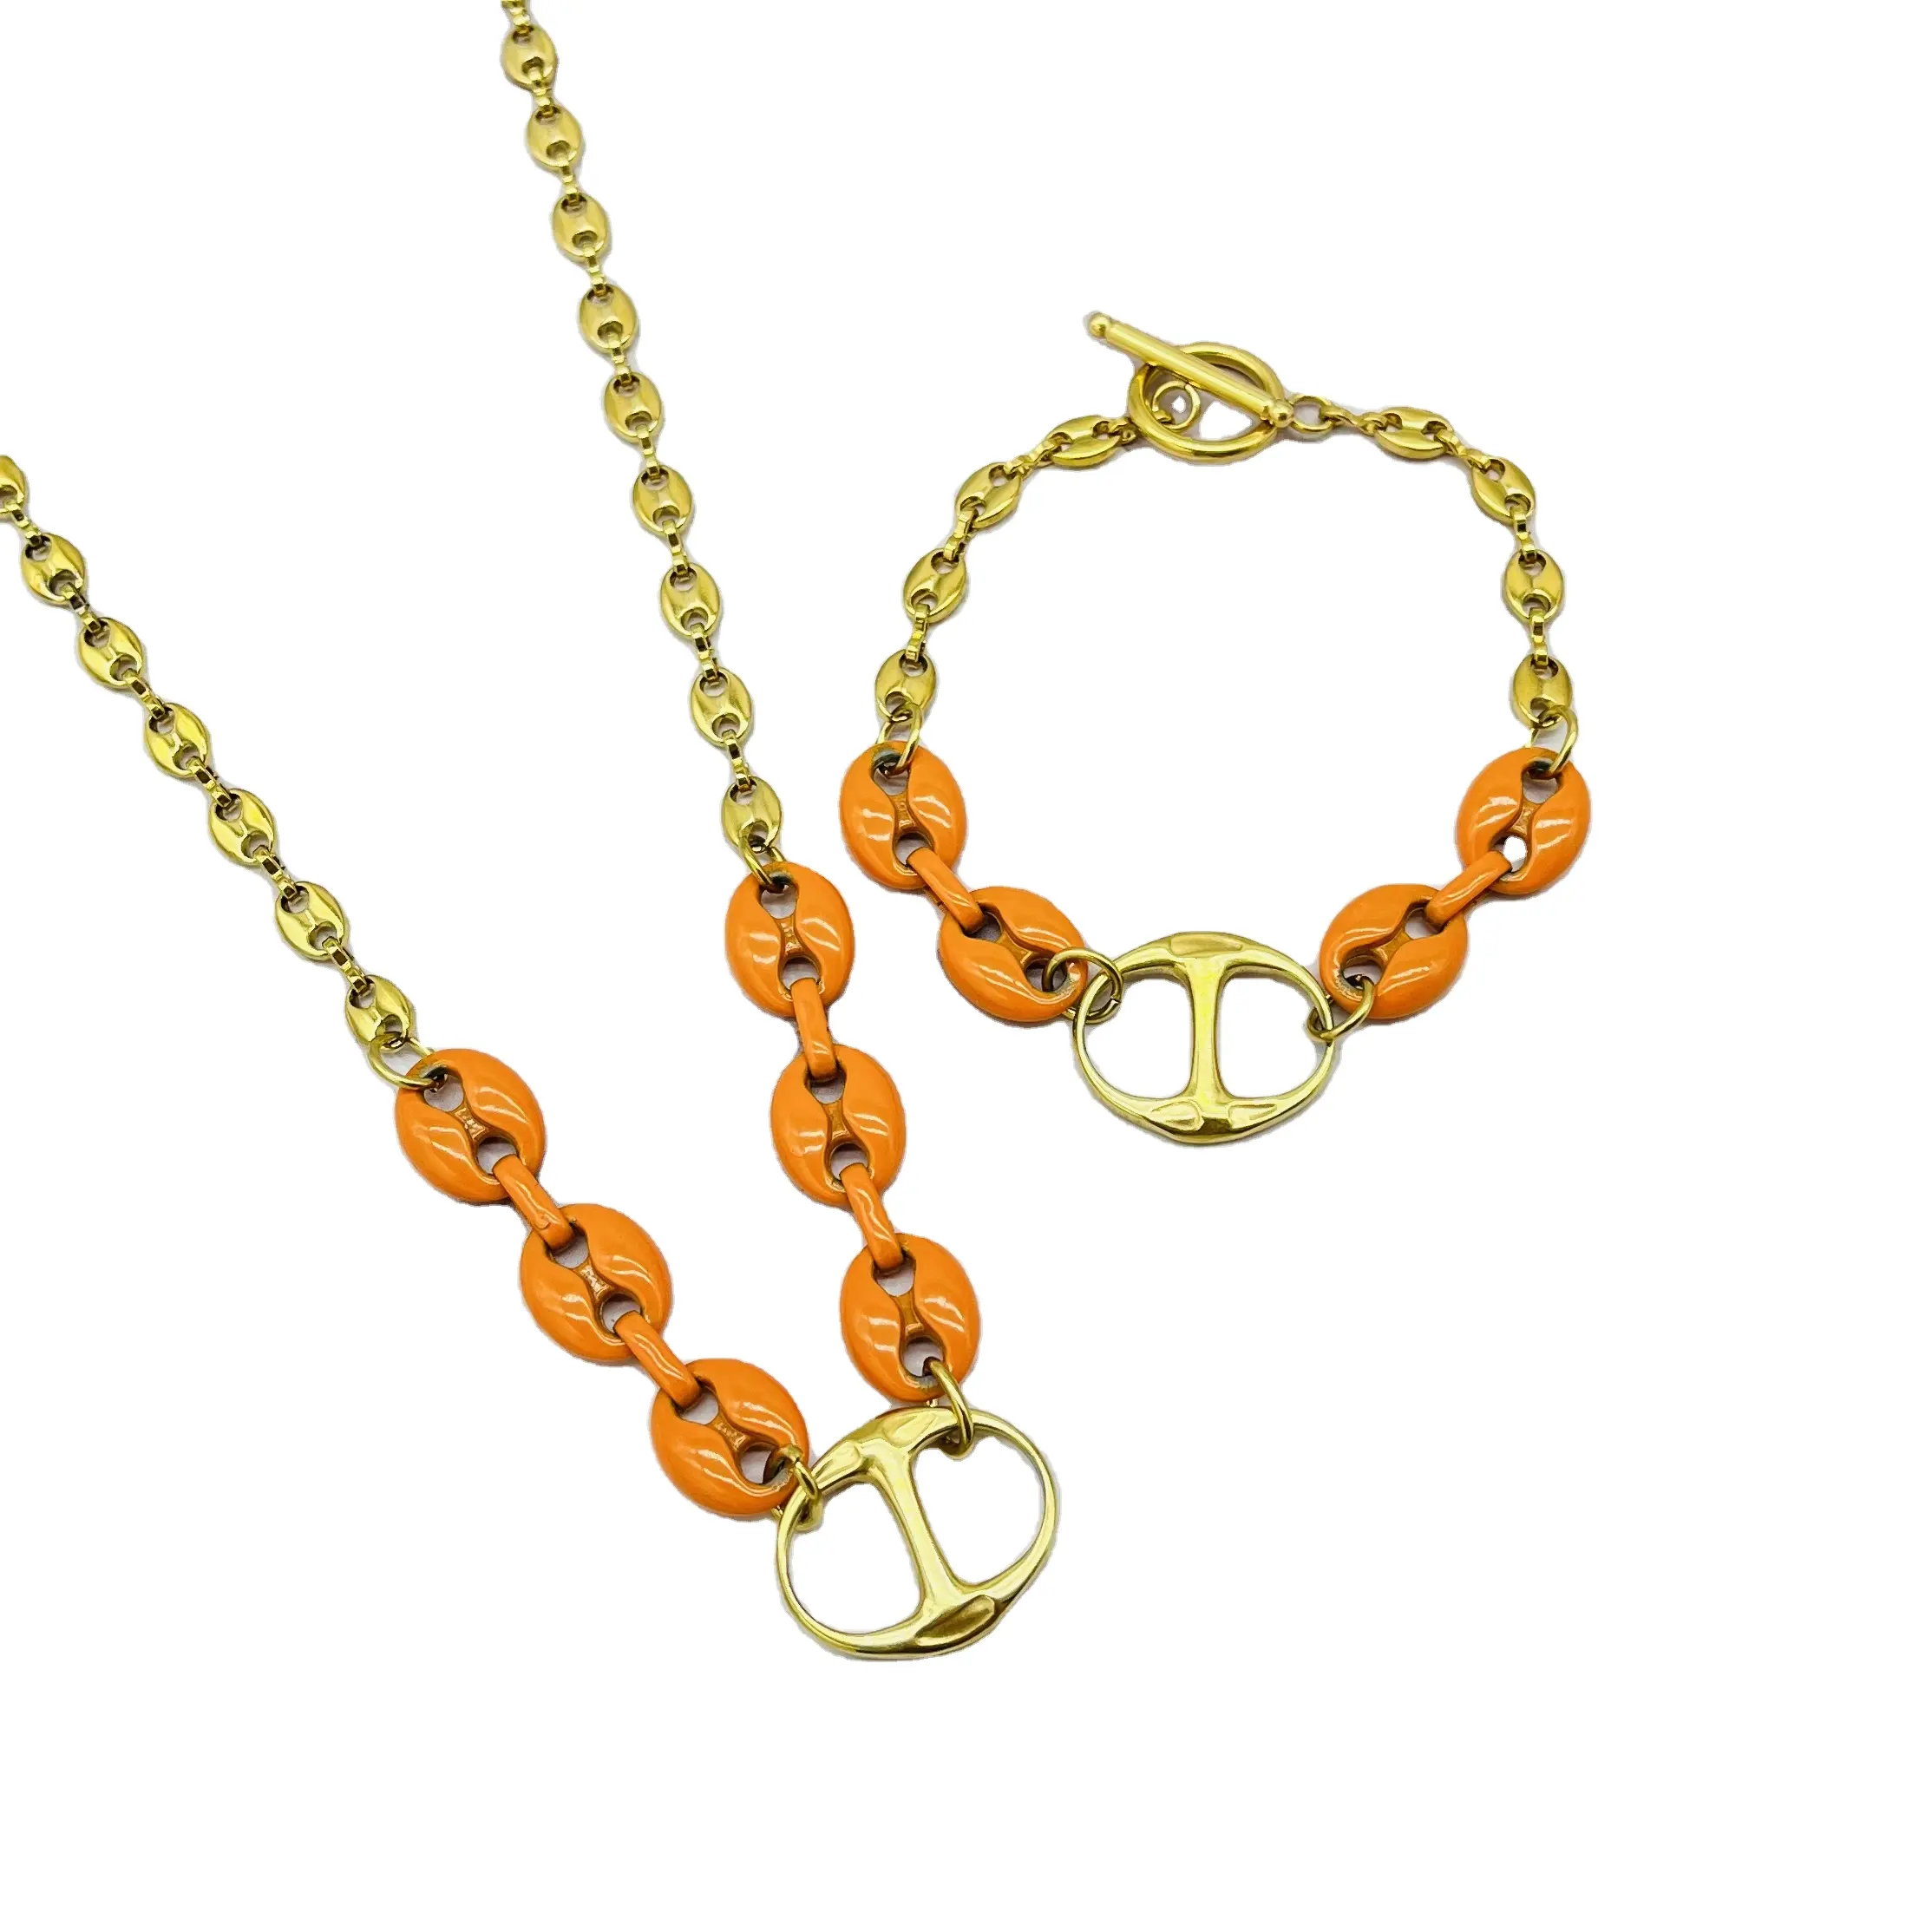 HC New Ladies Orange Pig Nose Necklace Coffee Bean Bracelet Stainless Steel Jewelry Sets Dubai 18k Solid Gold Indian Bridal